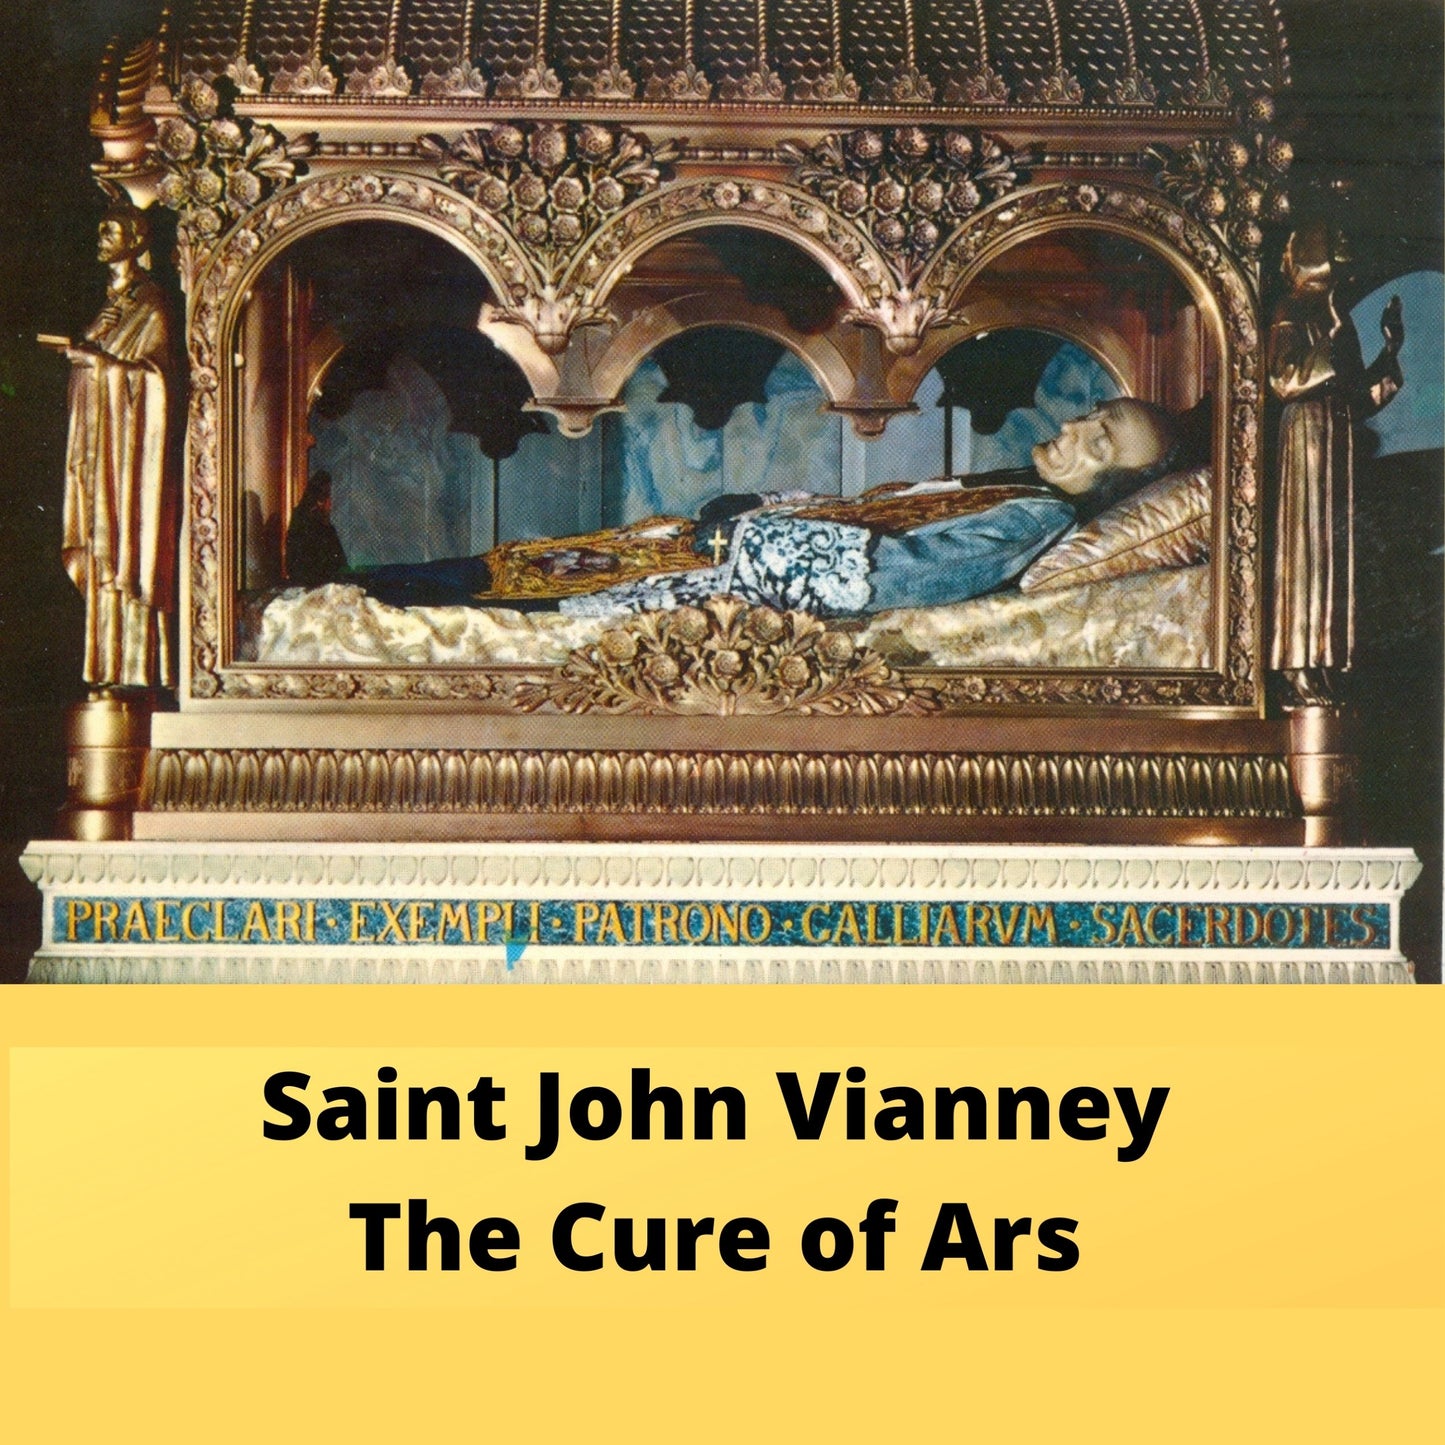 Saint John Vianney - Cure of Ars Video Download MP4 - Bob and Penny Lord